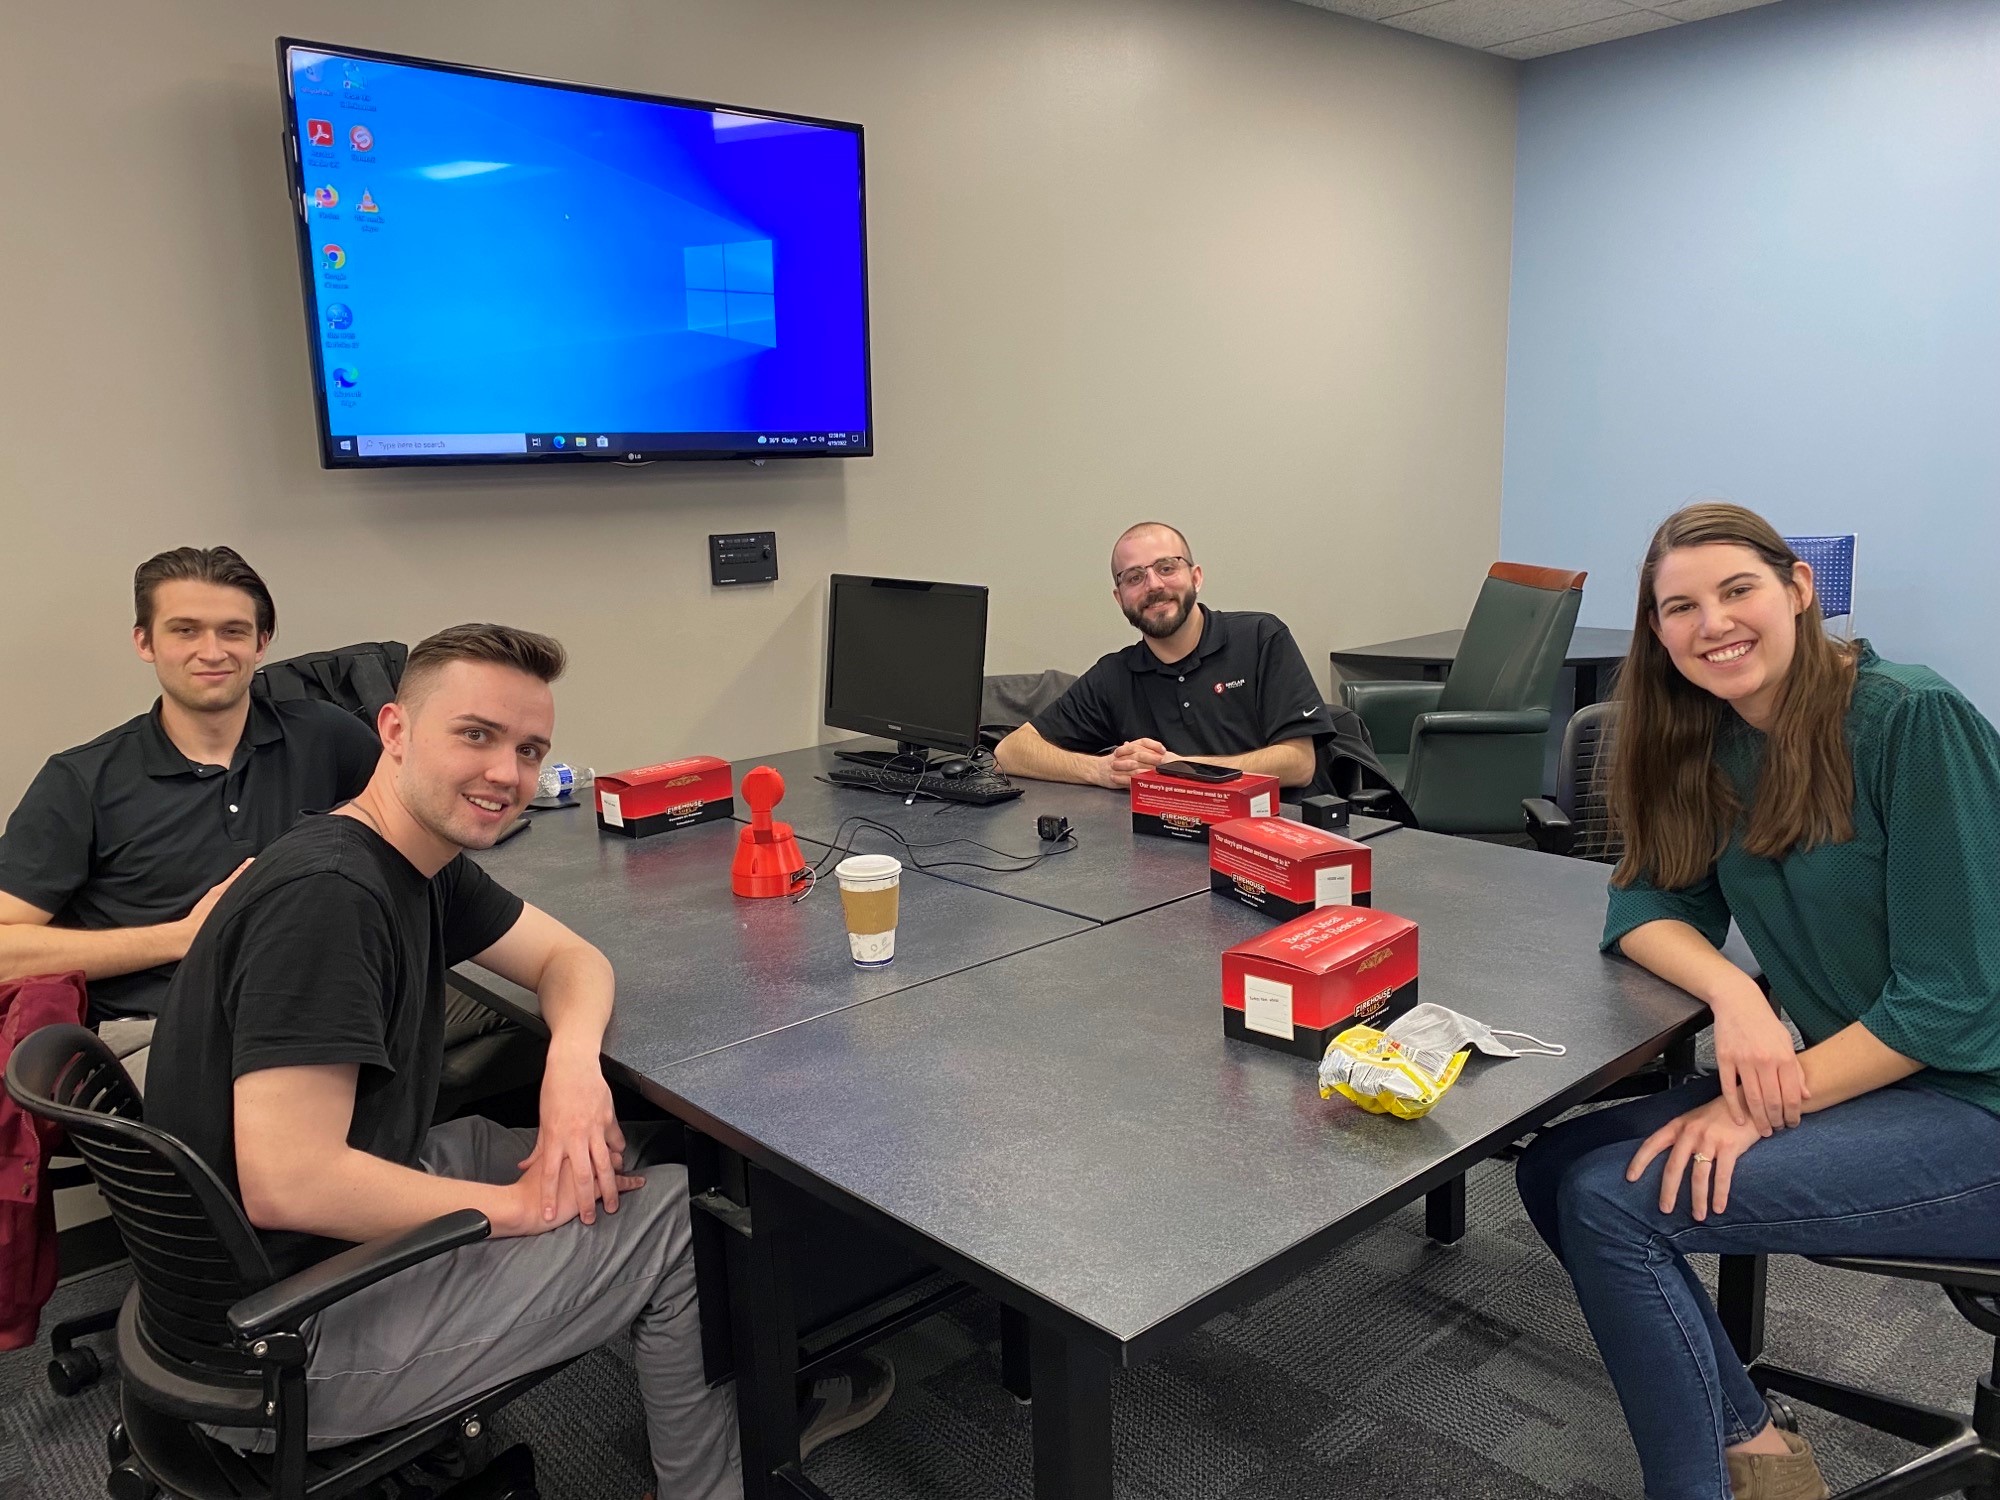 The Ohio Federal Research Network’s (OFRN) funded project “Affordable LIDAR Technologies for Integration and Unmanned Deployment (ALTITUDE)” held an event for the project’s Student Experiential Engagement (SEE) participants